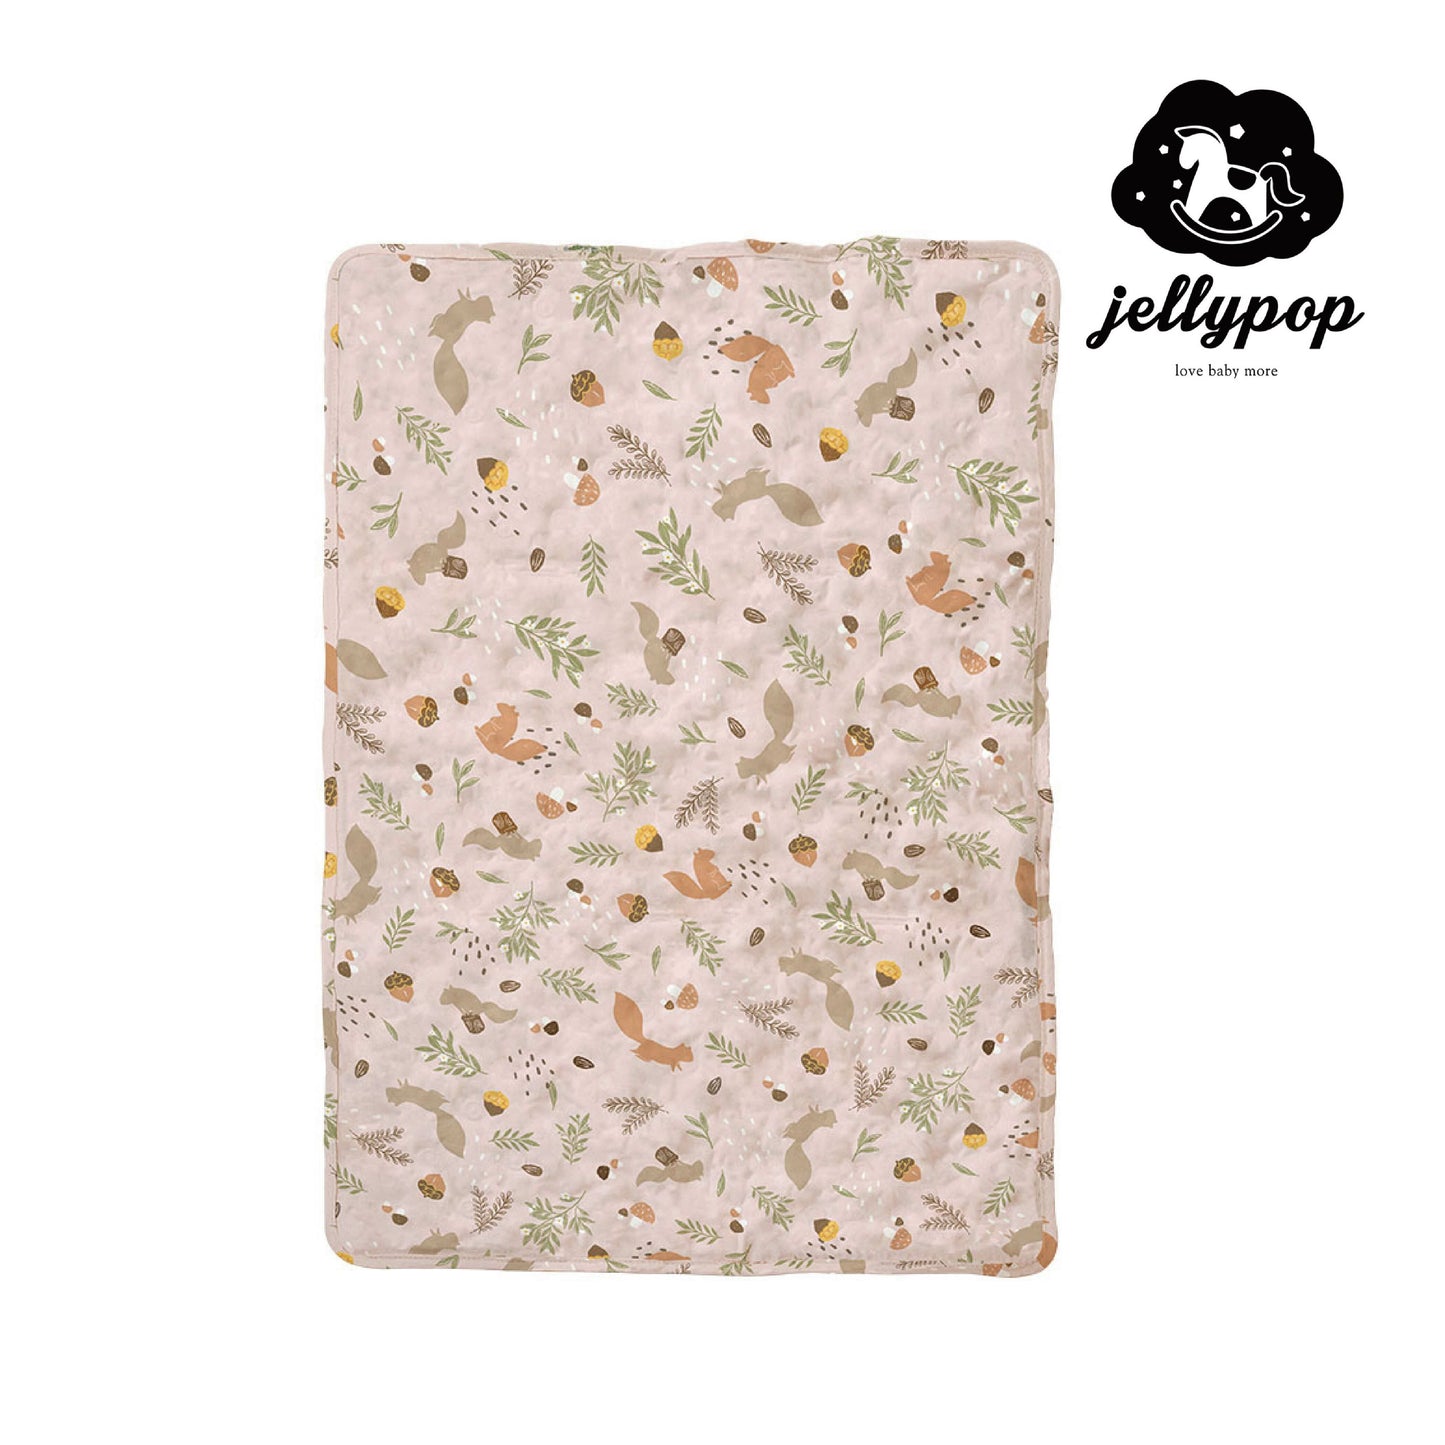 [Korea Jellypop] Jellymat brand new micro-particle cooling beads 100% cotton jelly mattress - Squirrel Forest